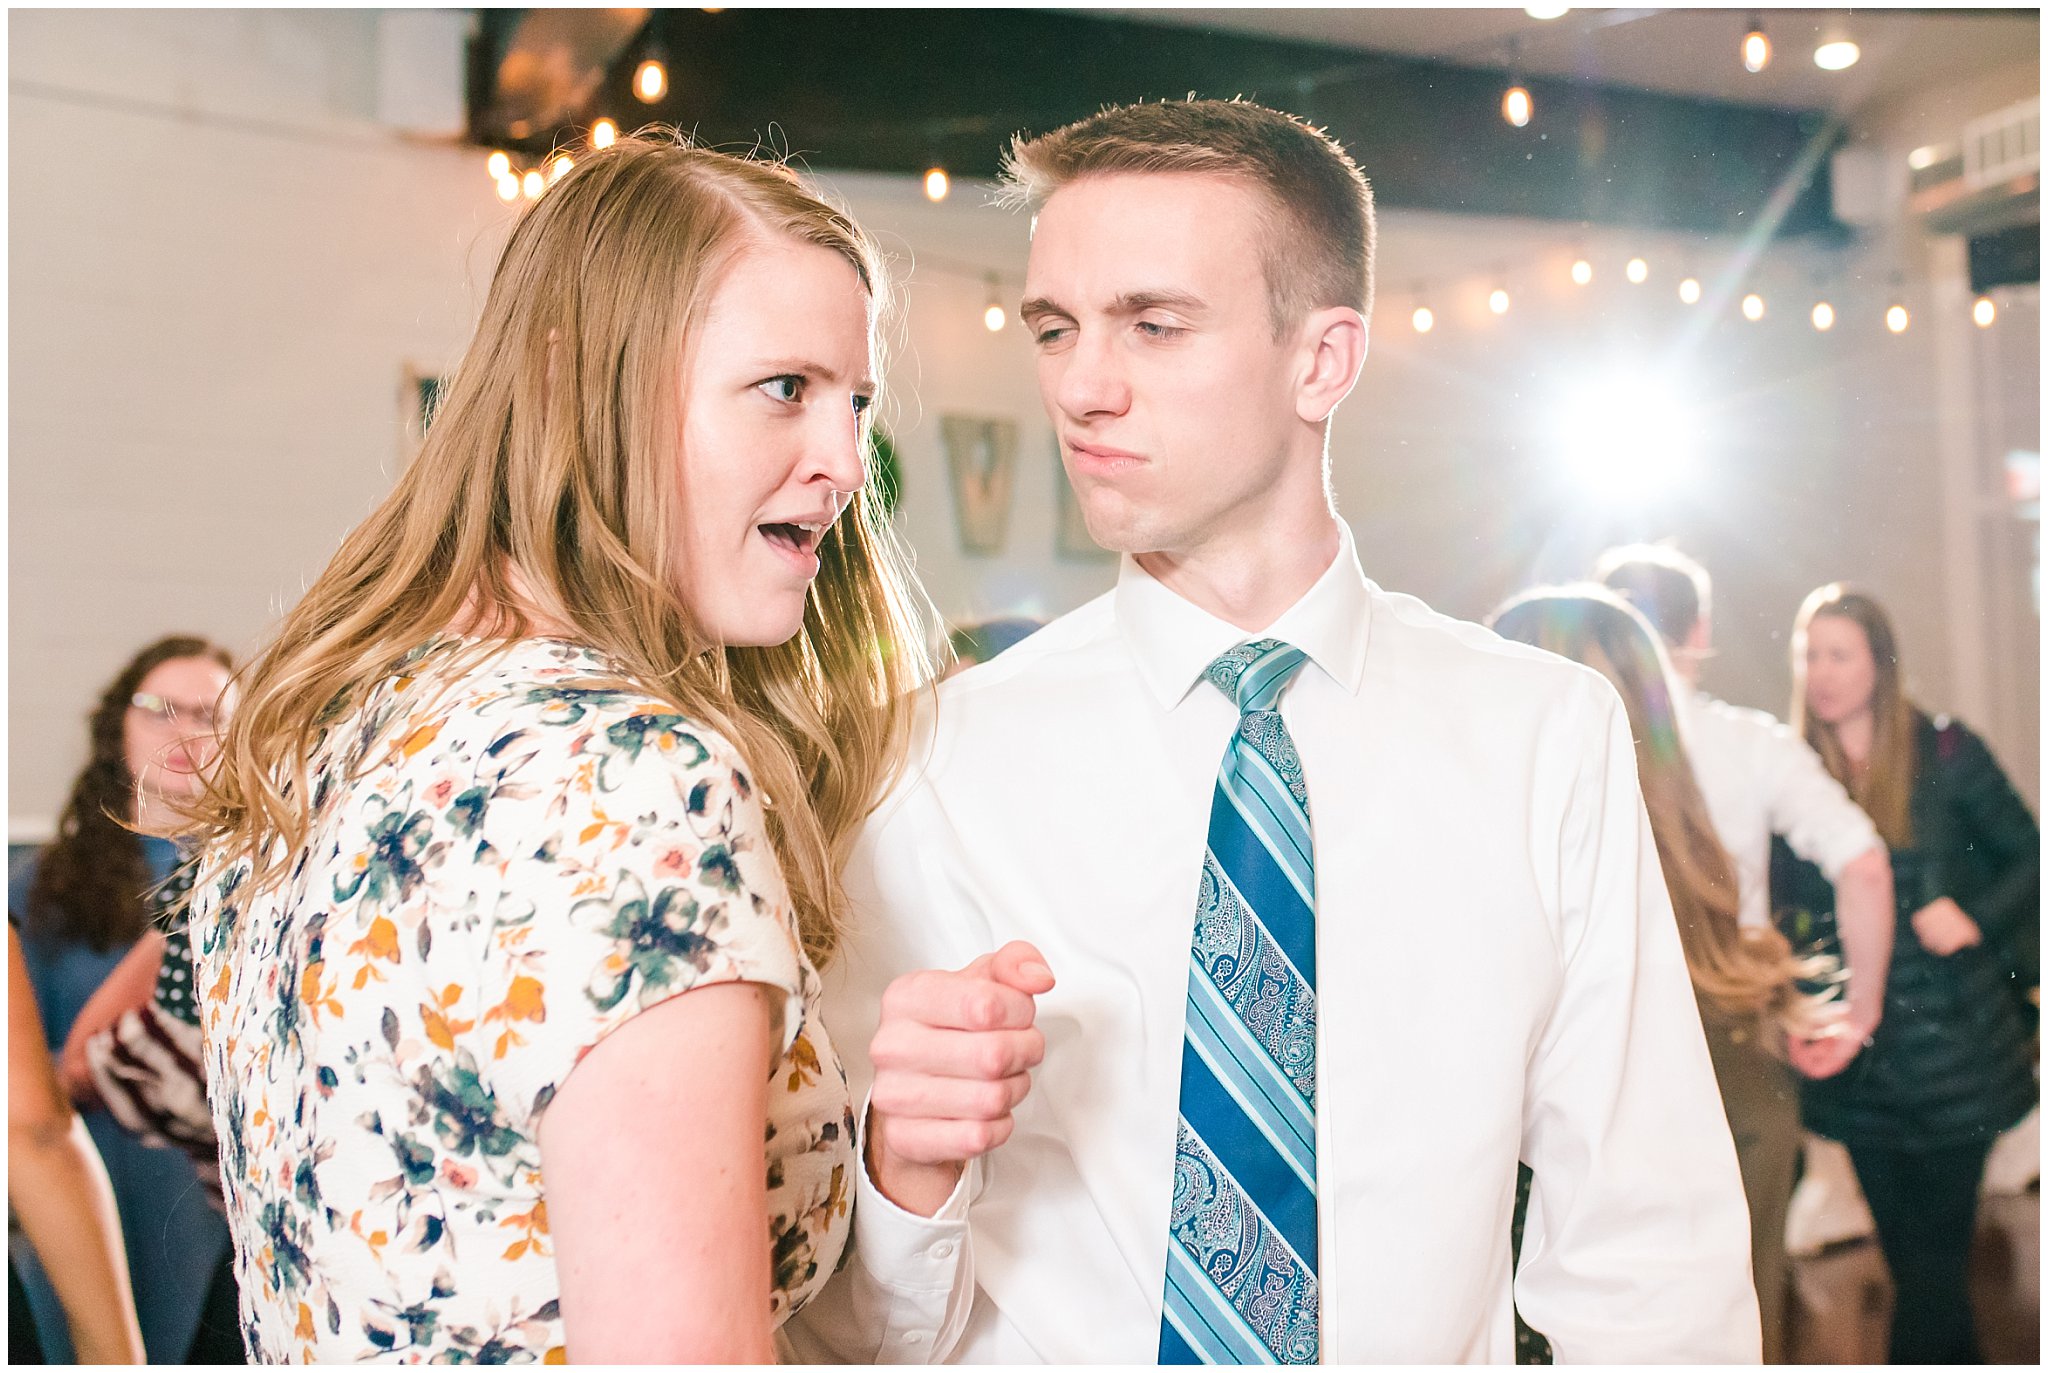 Party dancing with guests during reception at Sweet Magnolia Venues | Brown, Emerald Green, and white wedding | Ogden Temple and Sweet Magnolia Wedding | Jessie and Dallin Photography